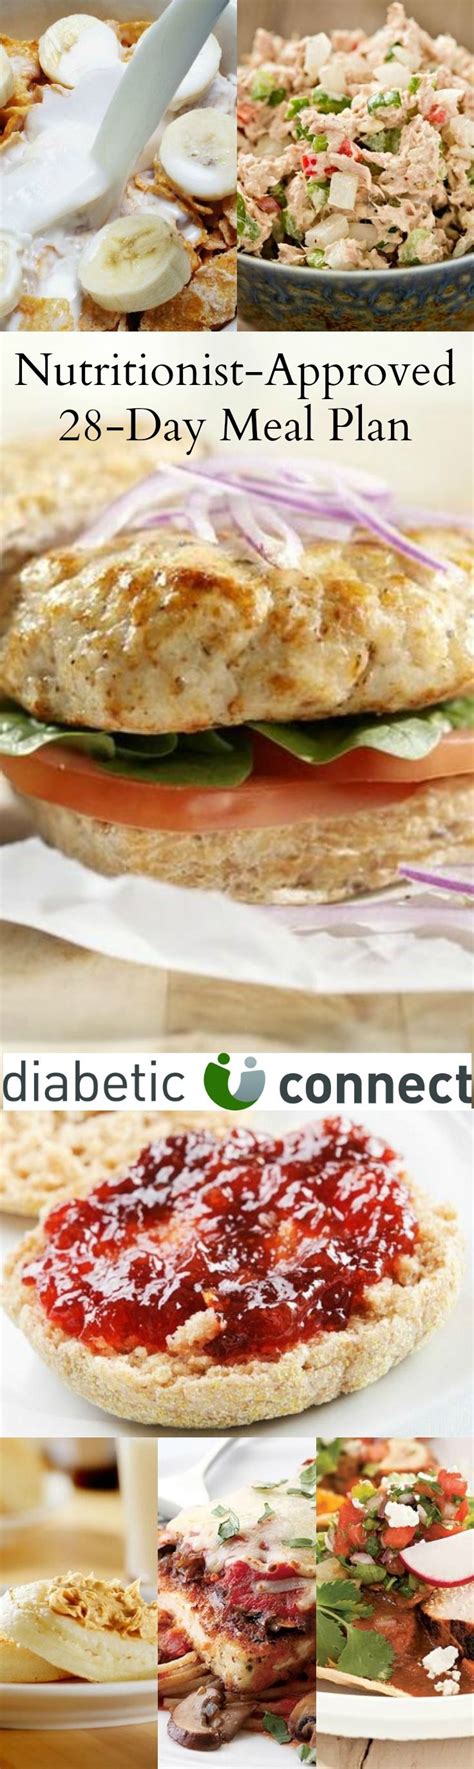 Healthy diabetic recipes and diet for diabetes. 20 Best Pre Diabetic Diet Recipes - Best Diet and Healthy Recipes Ever | Recipes Collection